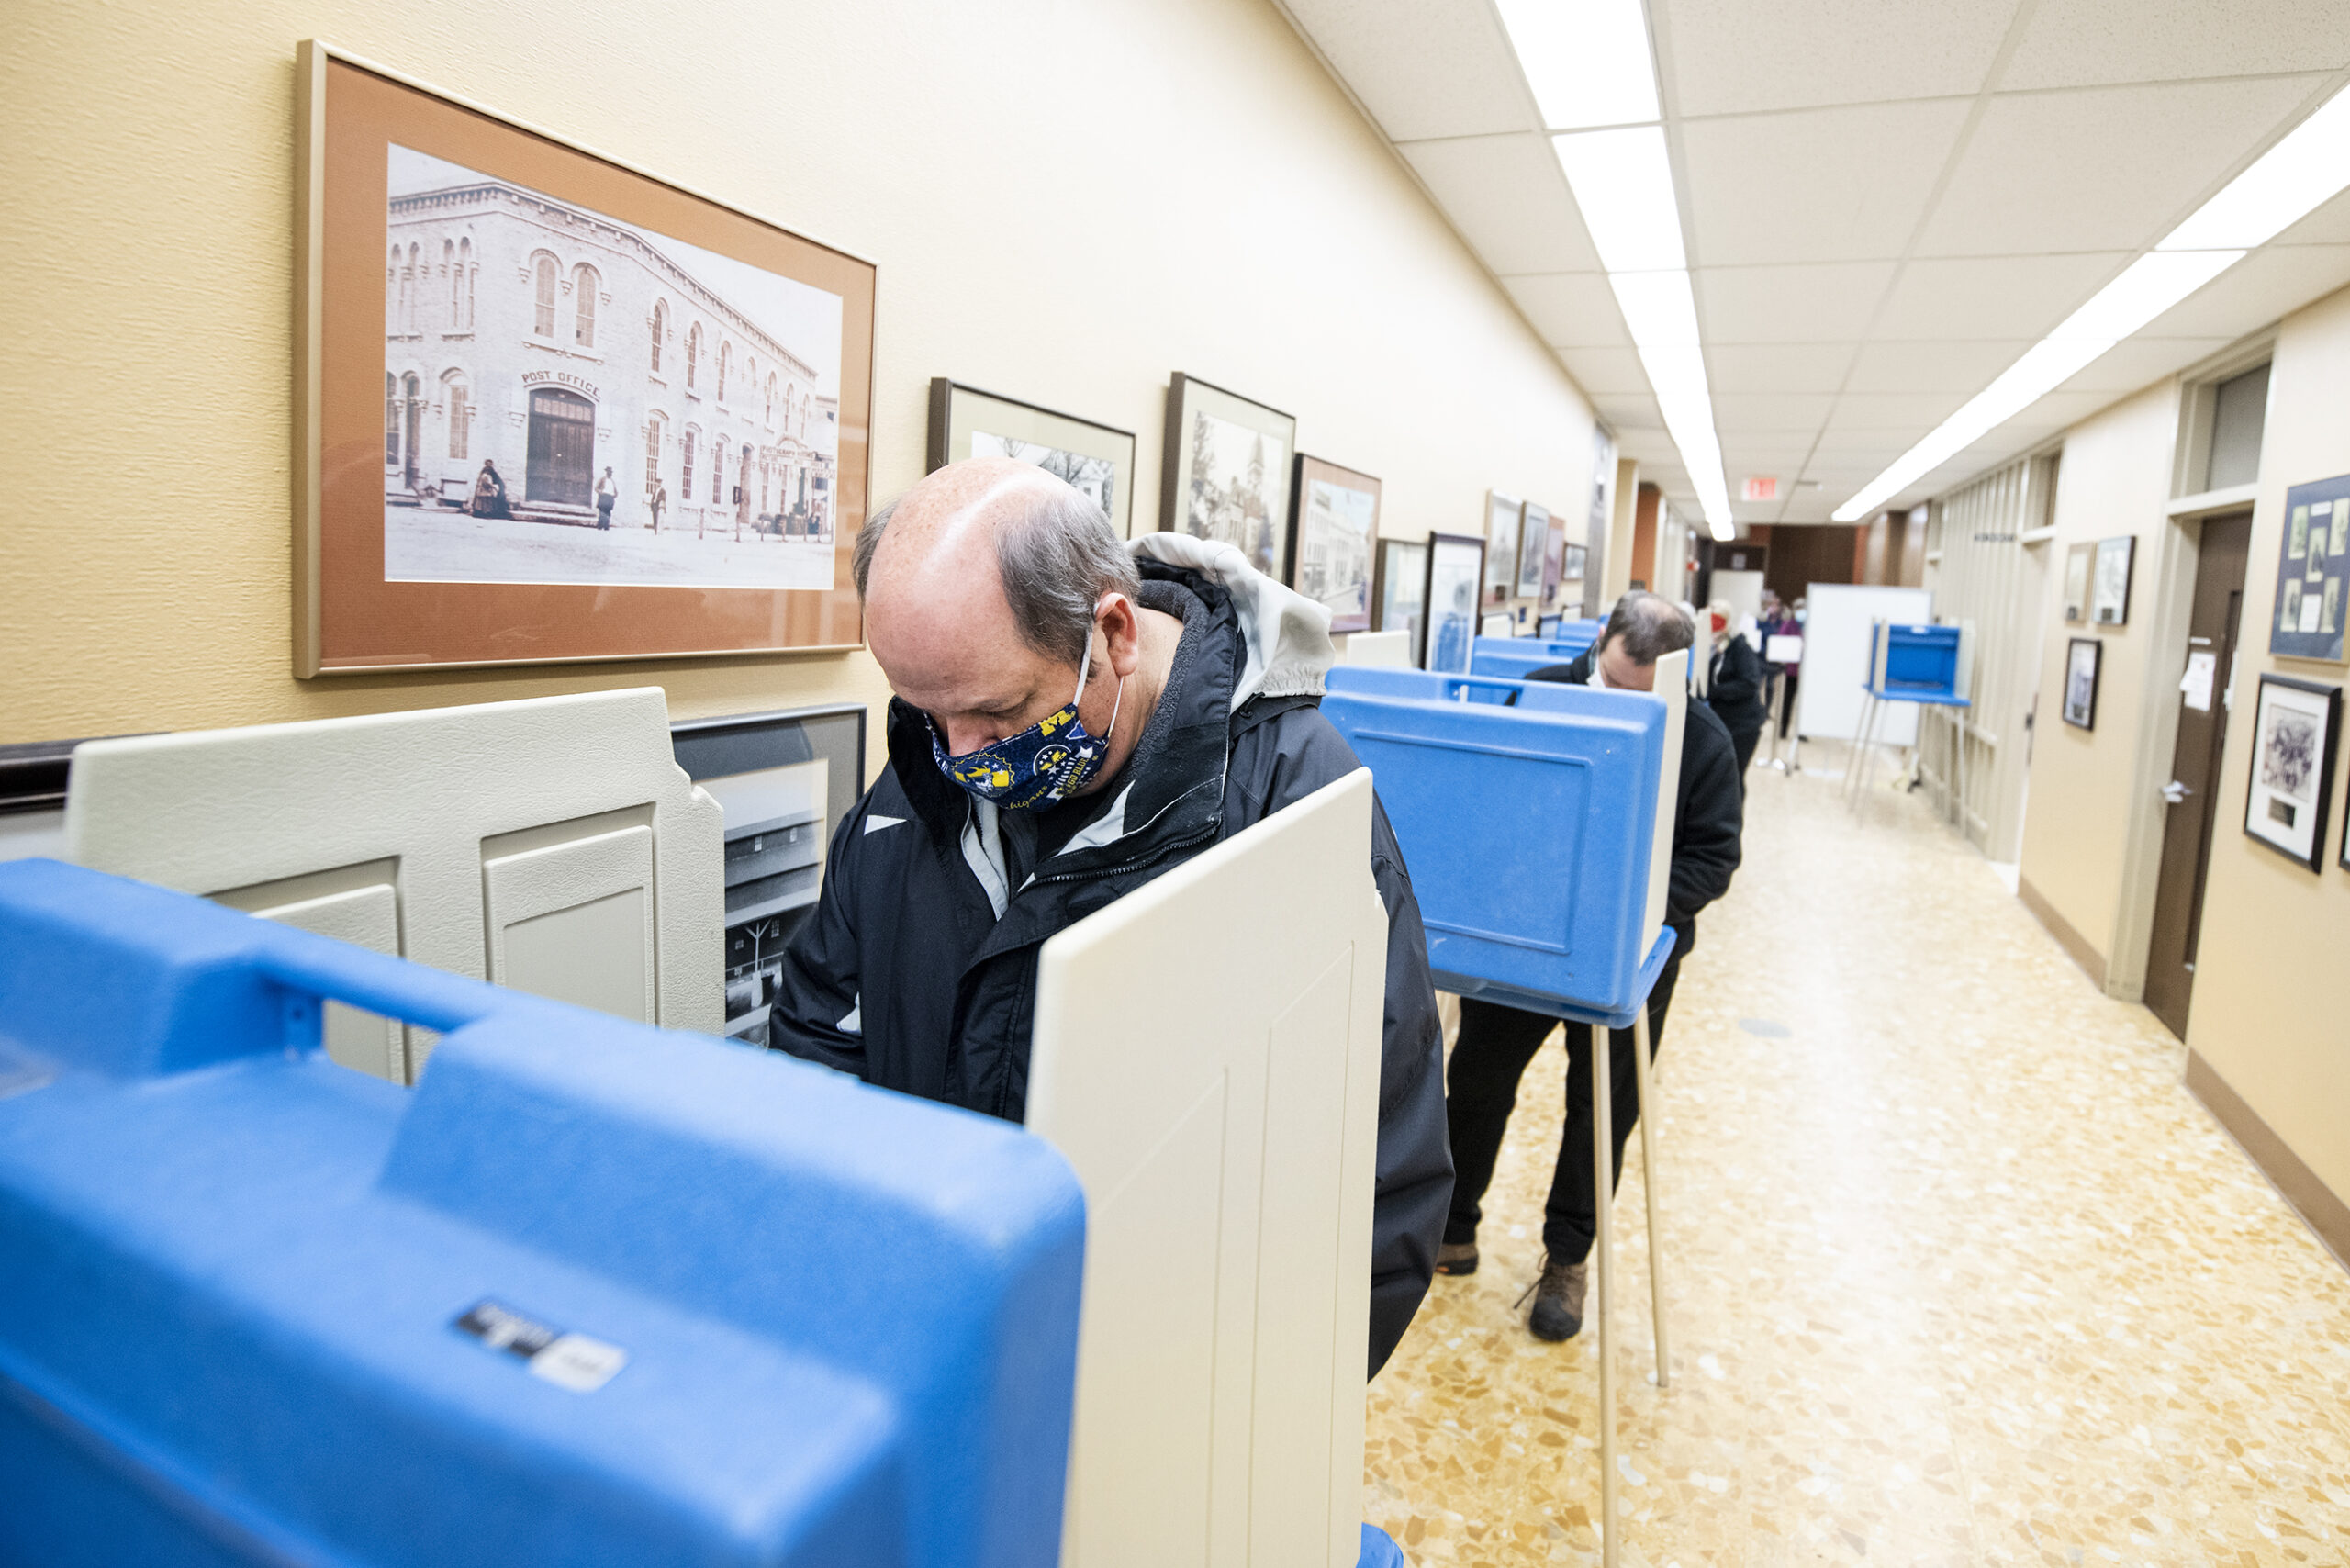 A man in a face mask stands at voting booth to fill out a ballot